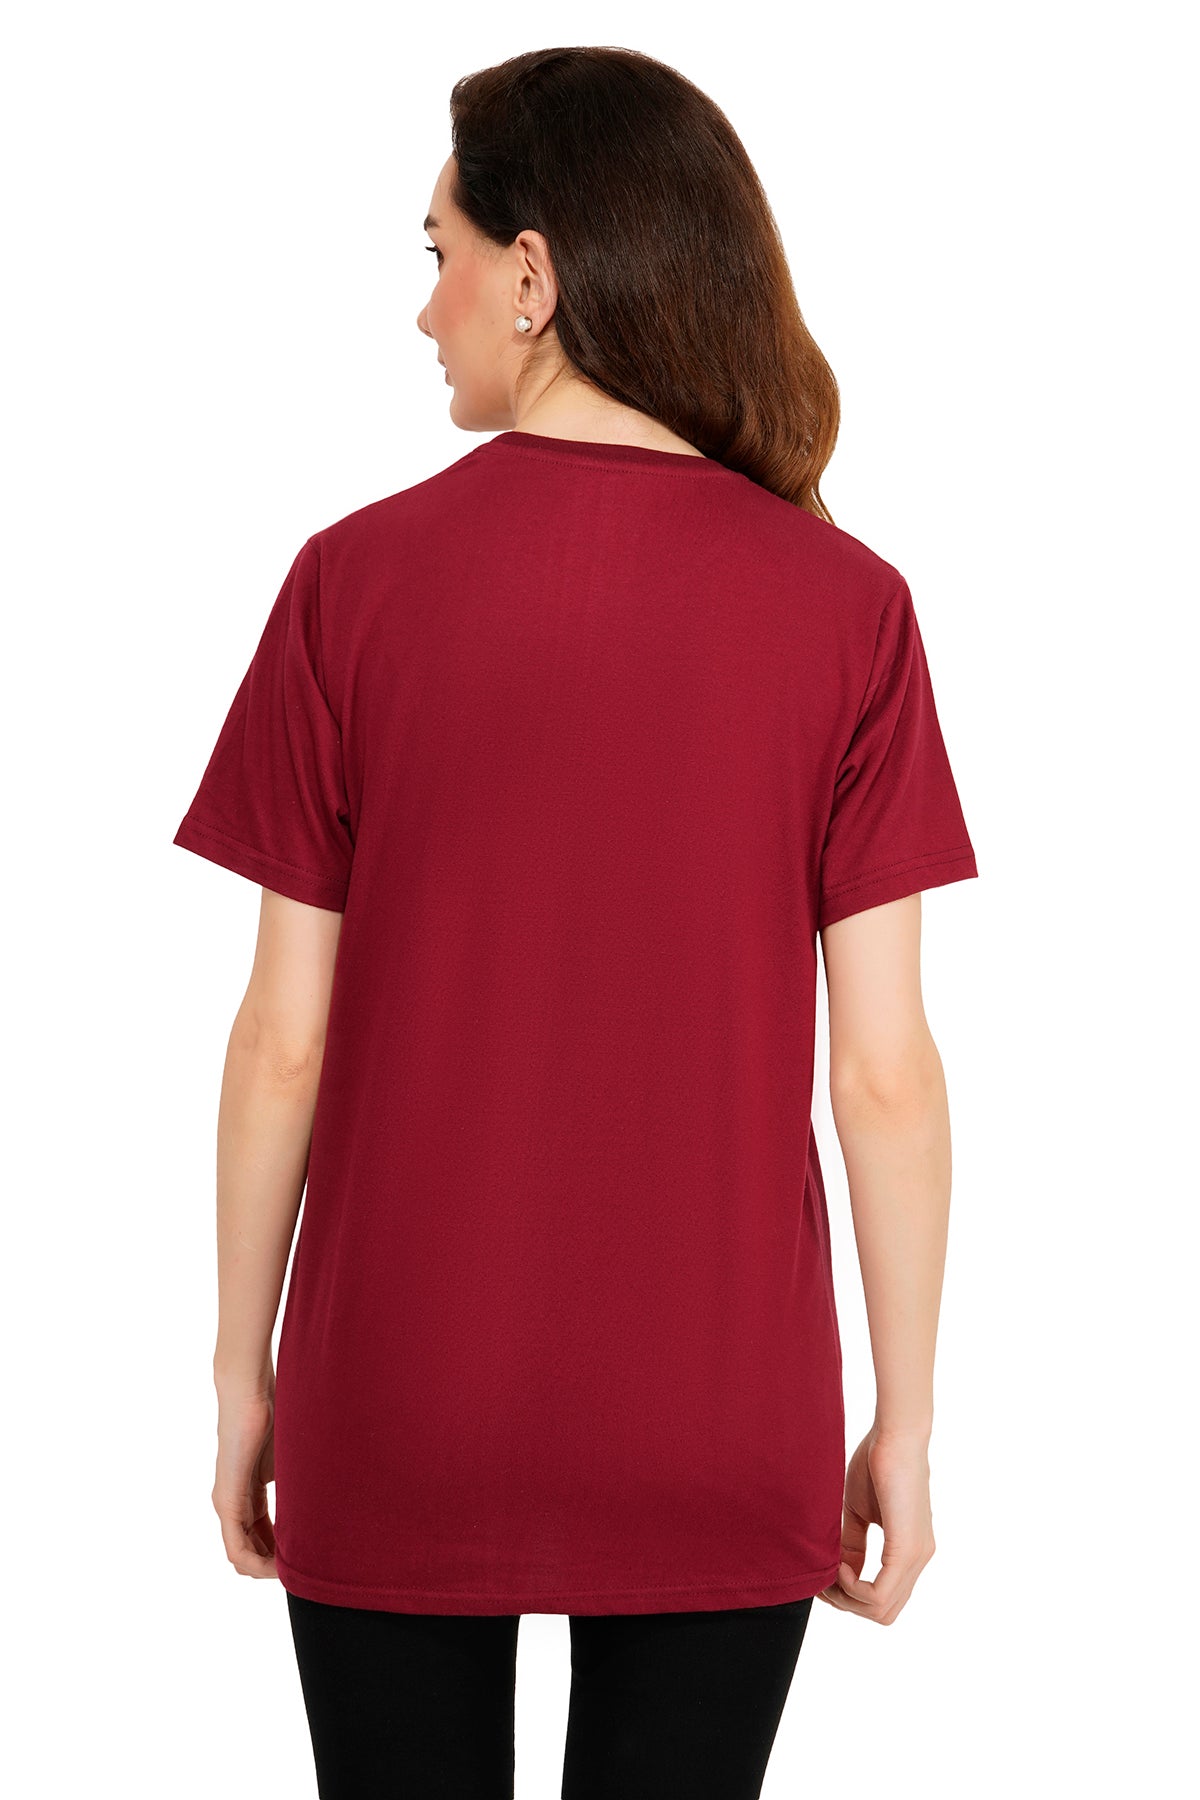 Women Dark Maroon Red Printed T-Shirt – SNAZZYNSUAVE